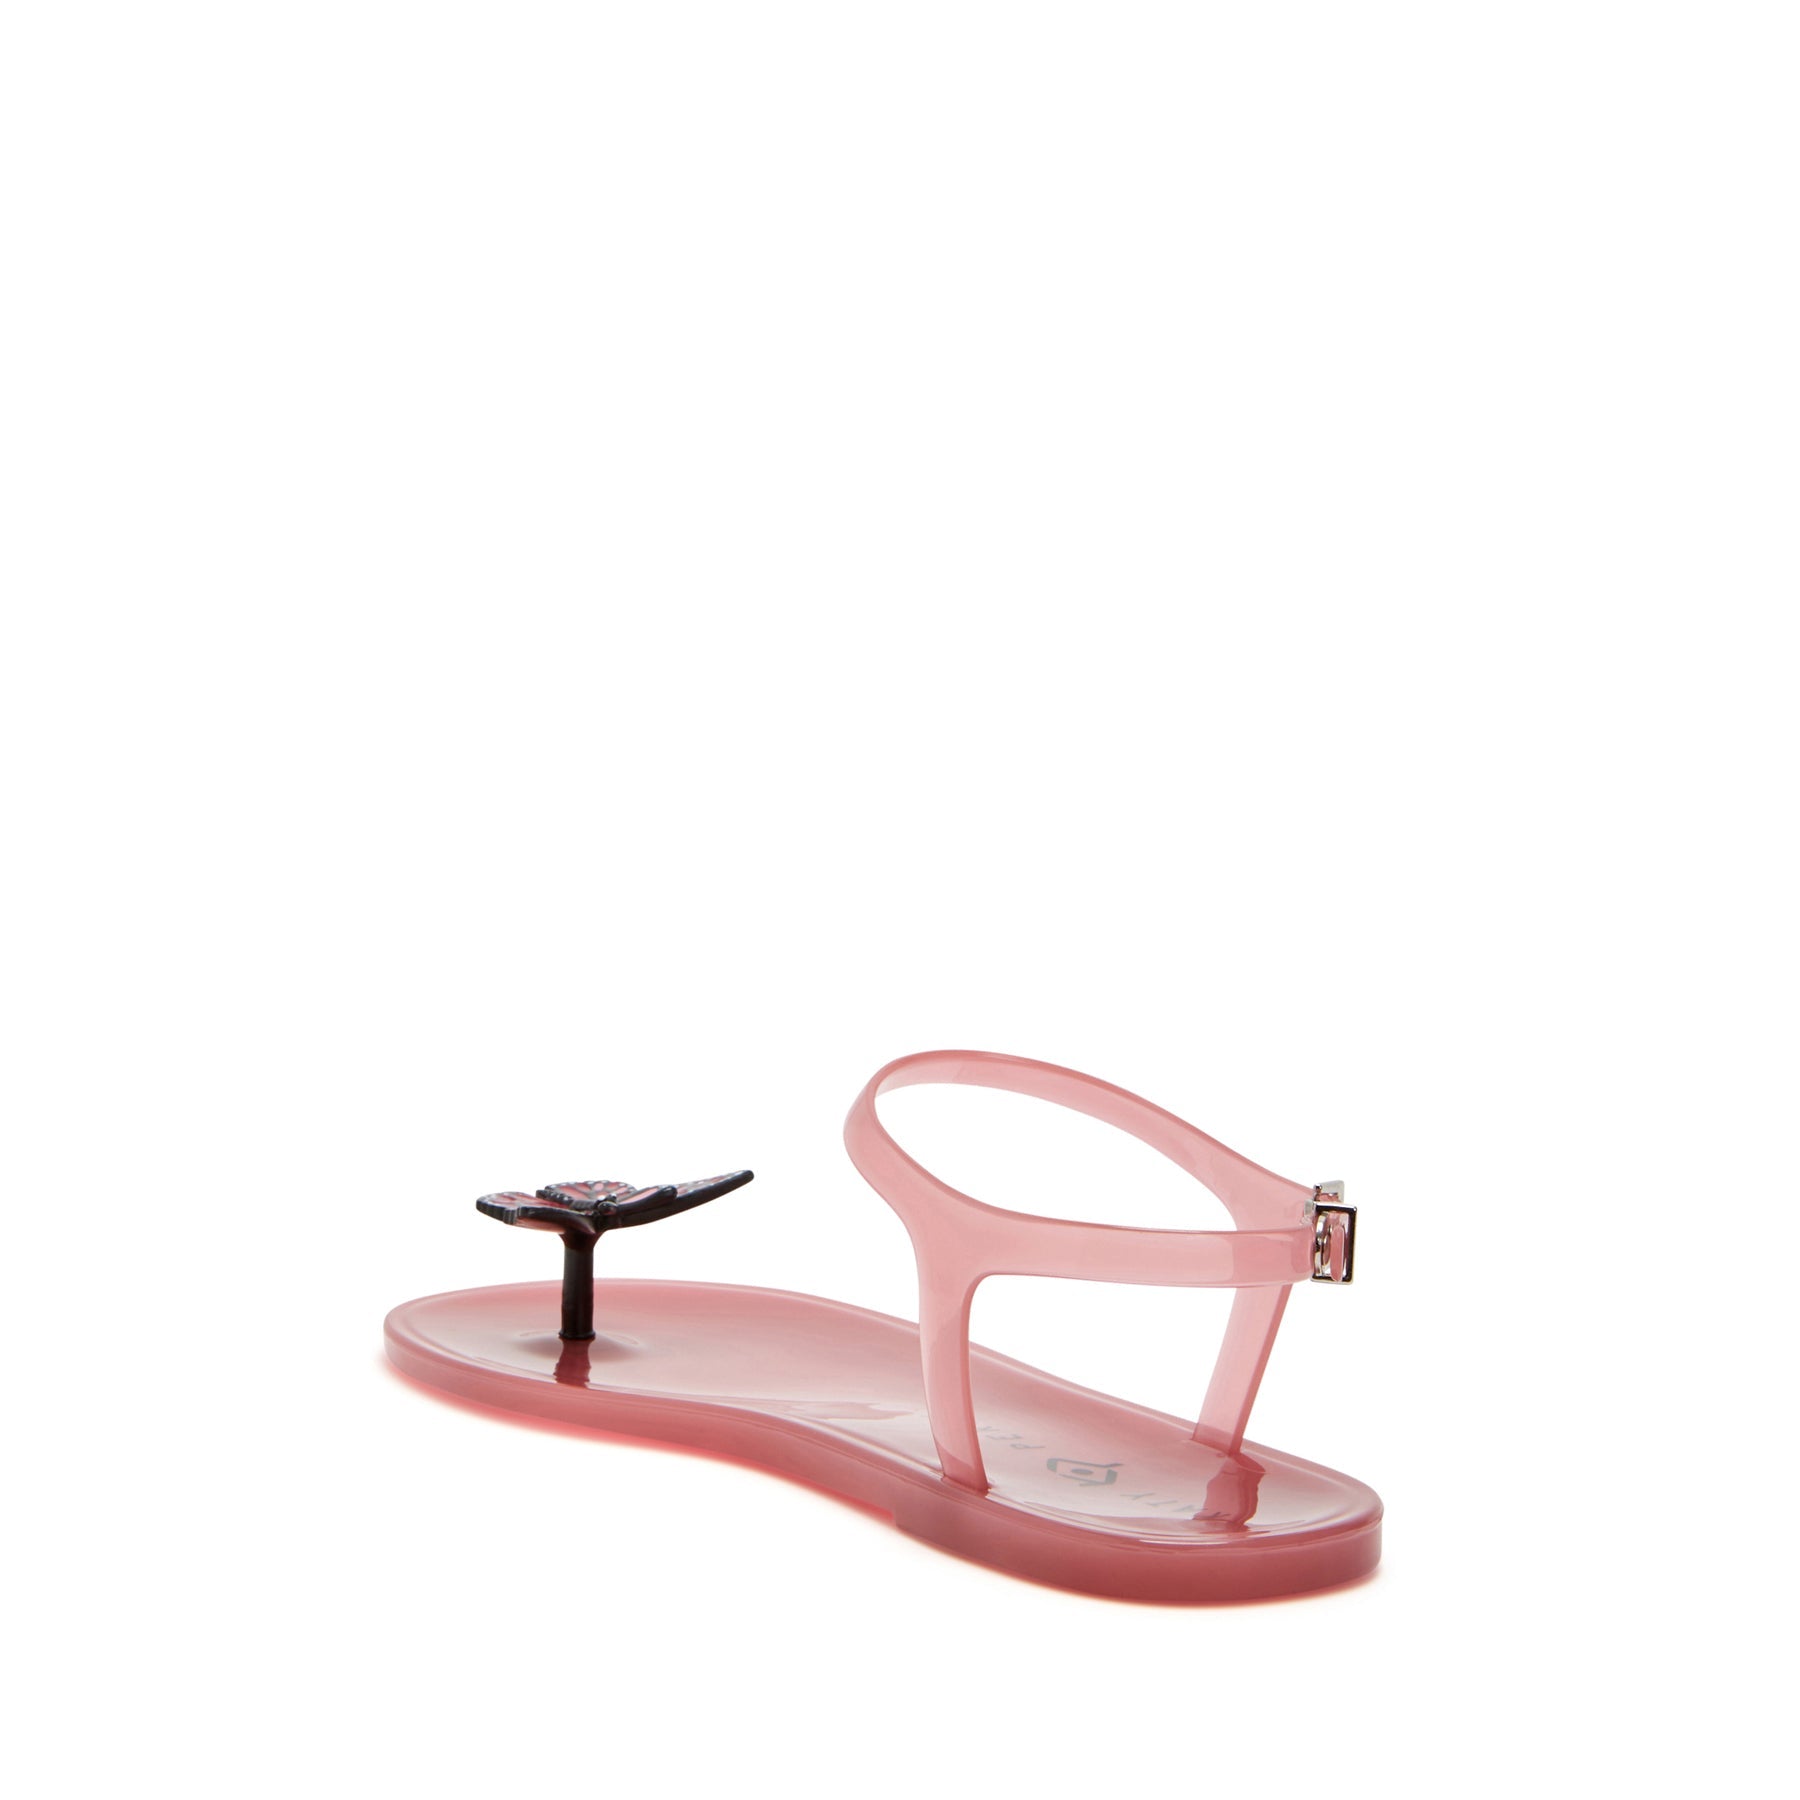 Buy Pink Satin Flat Sandal With BUTTERFLY BROOCH, Bridesmaid Shoes, Women  Sandals, Kids Sandals, Mommy and Me Shoes Online in India - Etsy